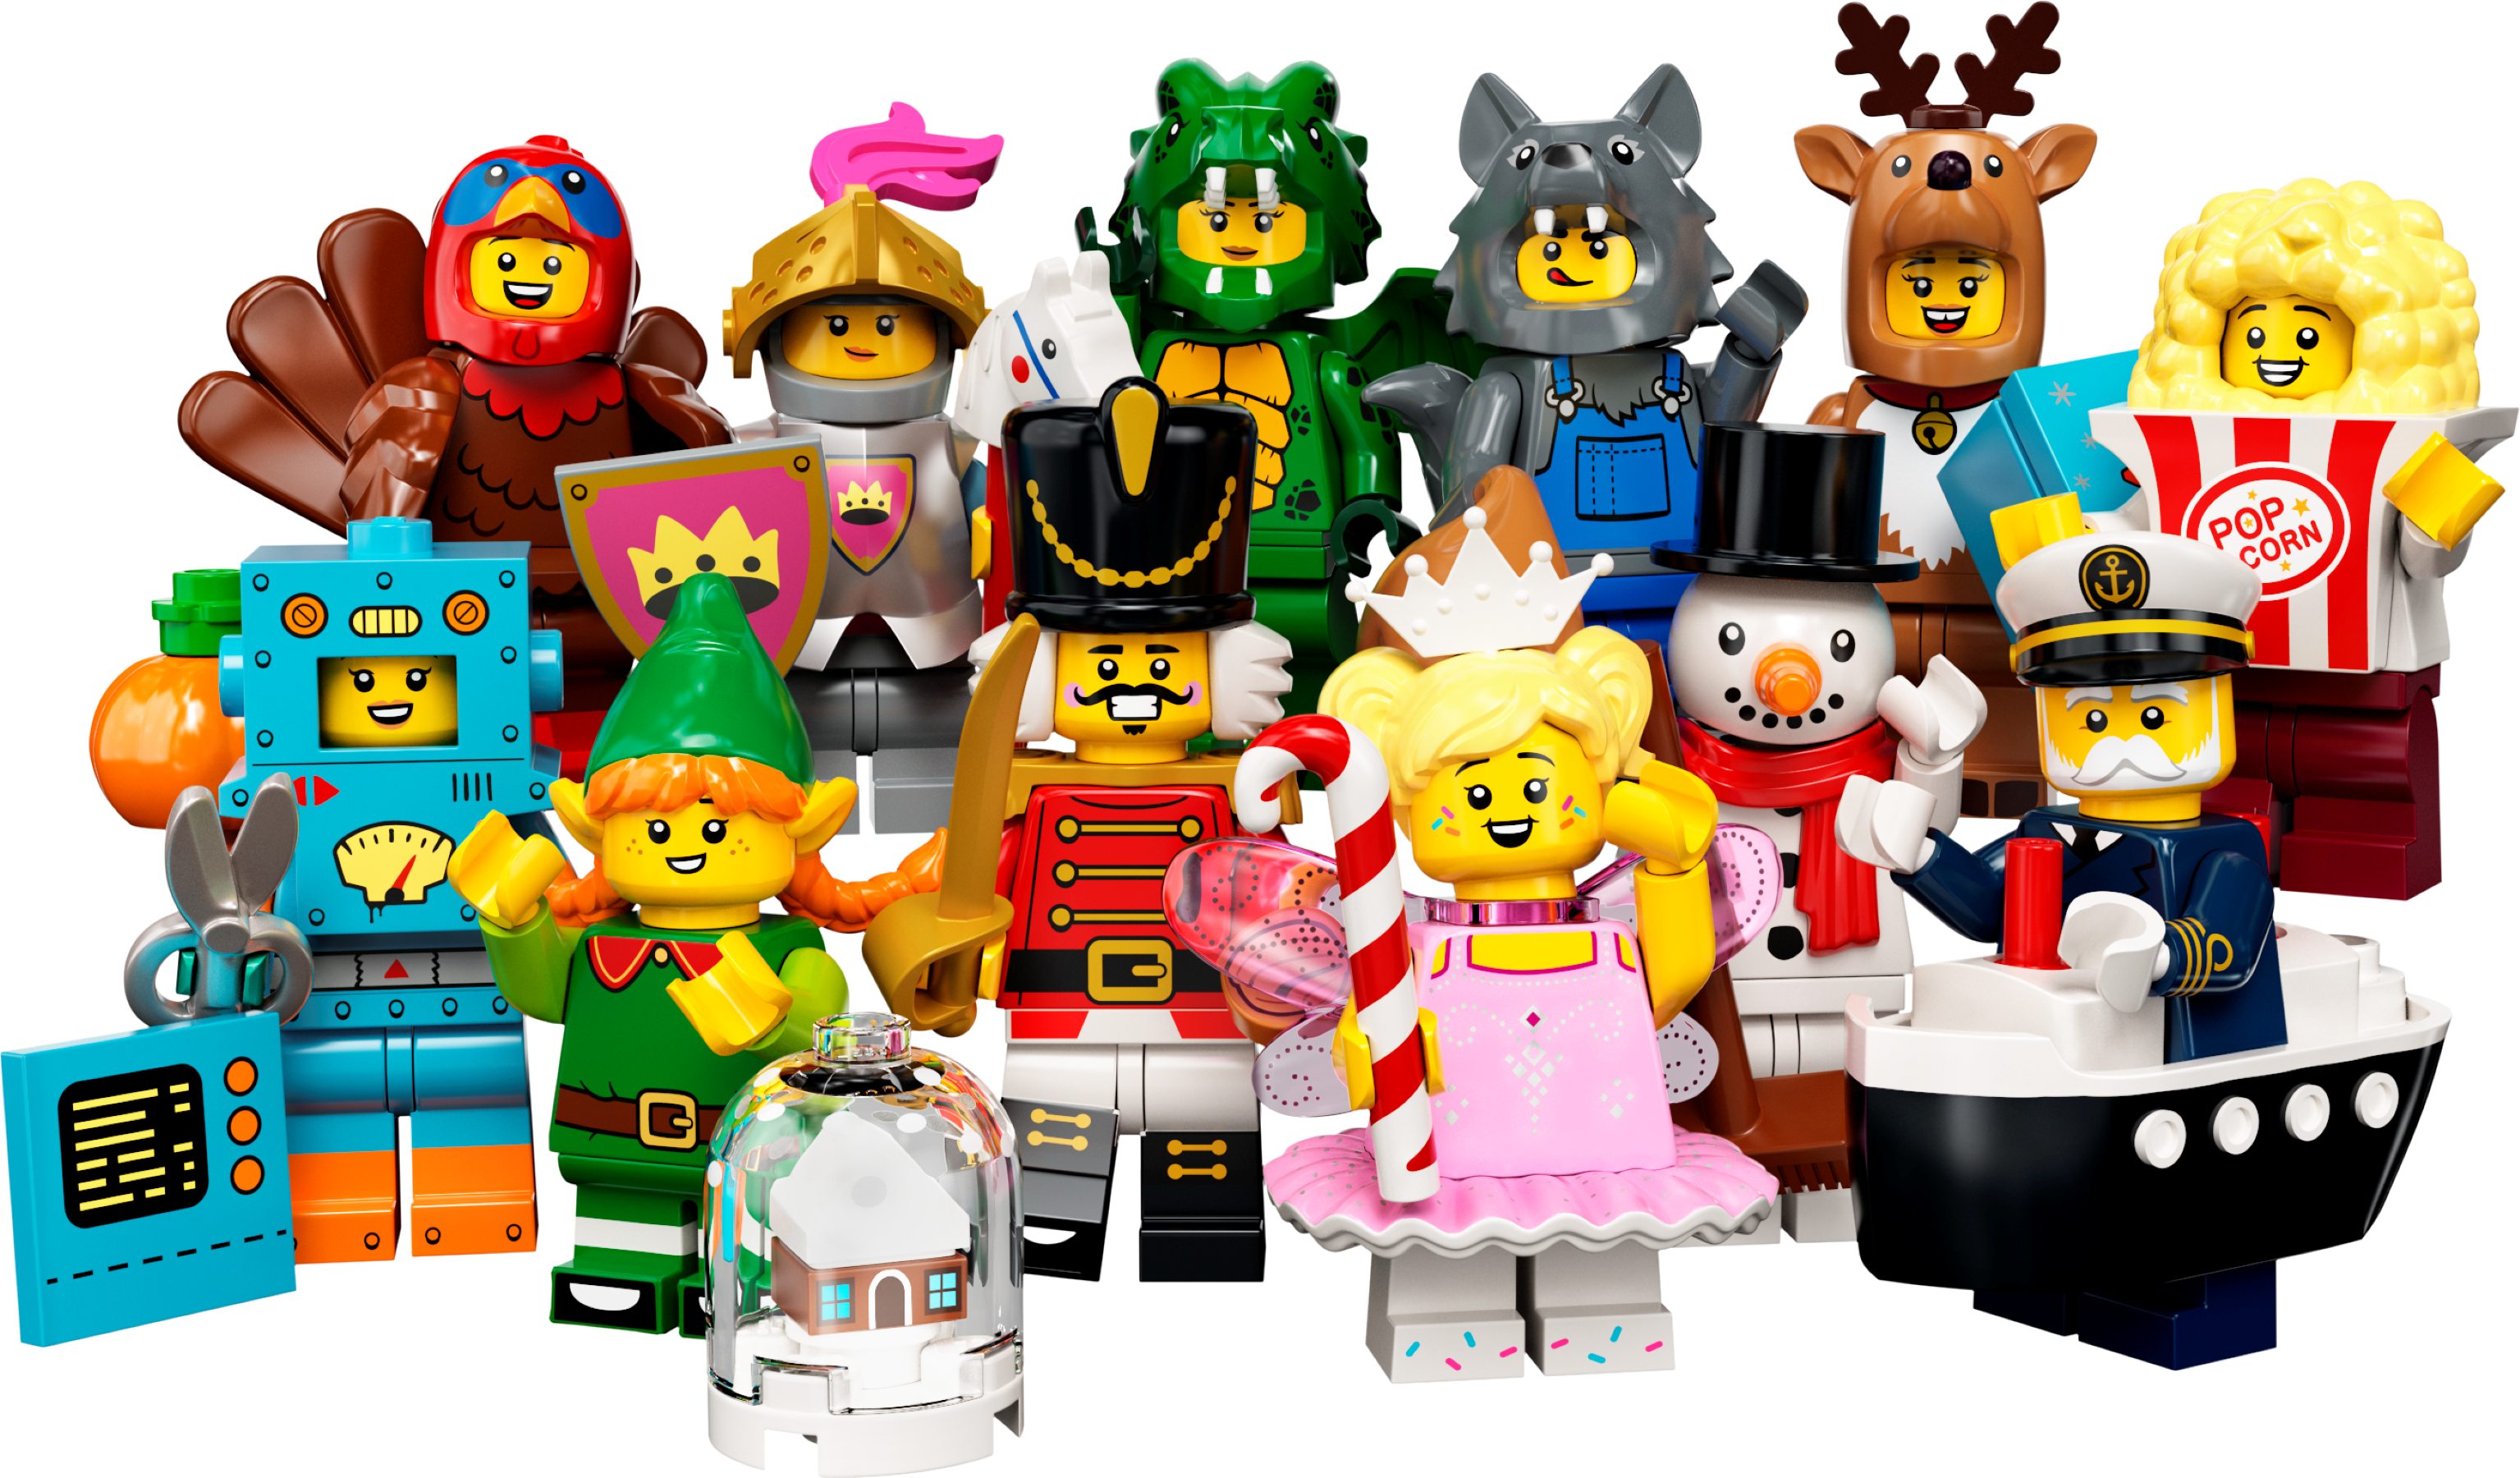 GENUINE LEGO MINIFIGURES VARIOUS COLLECTIBLE SETS CHOOSE YOUR OWN 